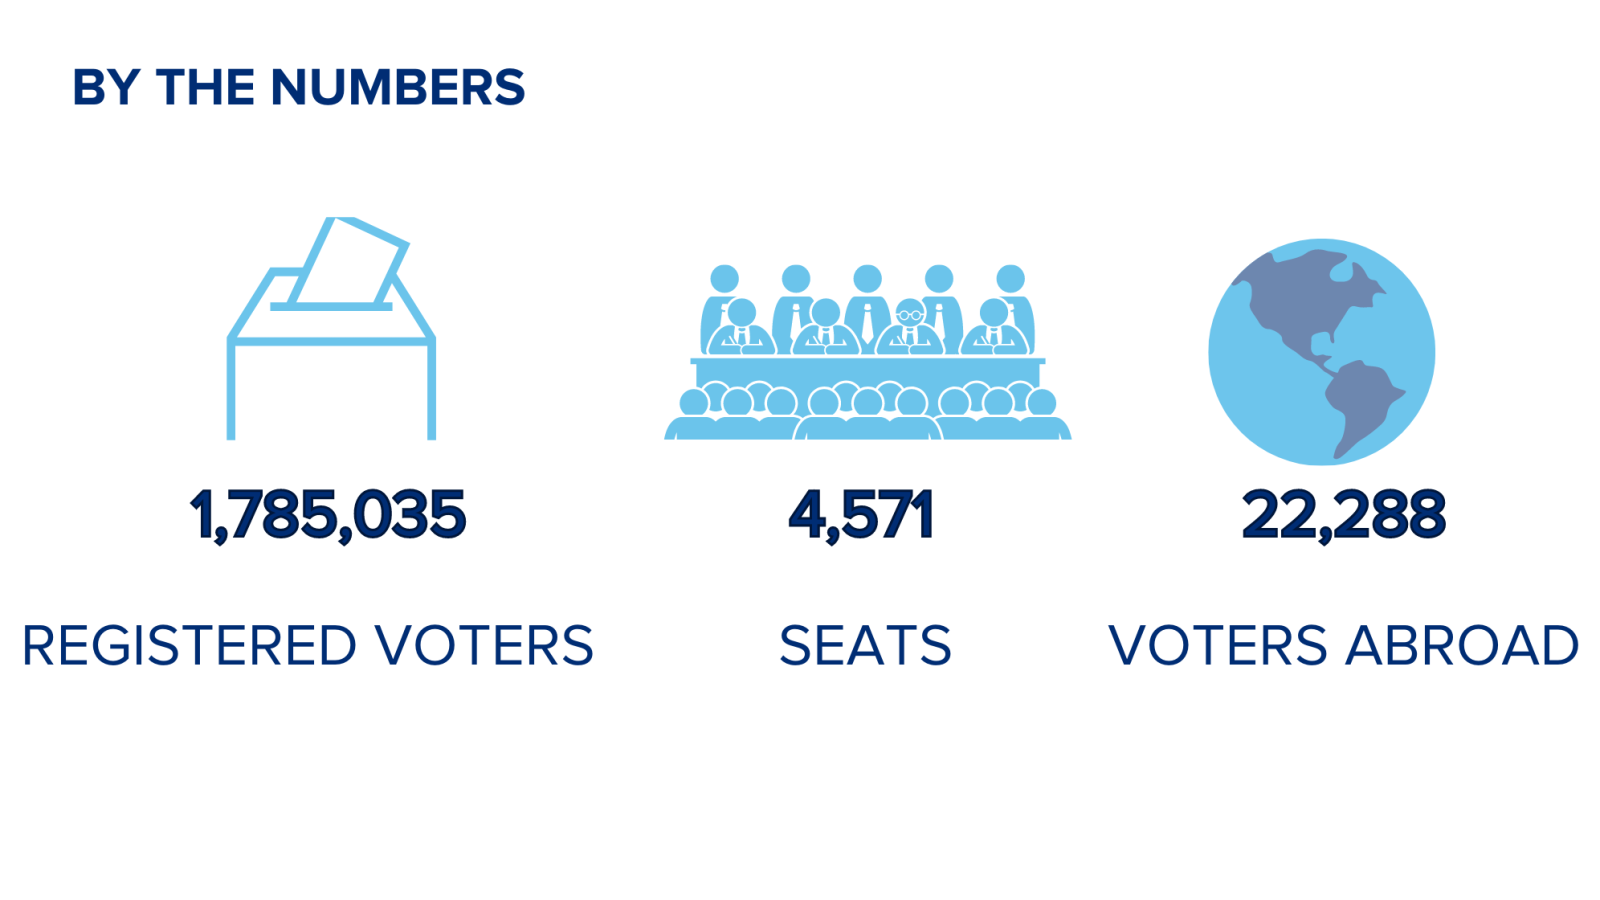 1,785035 registered voters, 4571 seats, 22,288 voters abroad